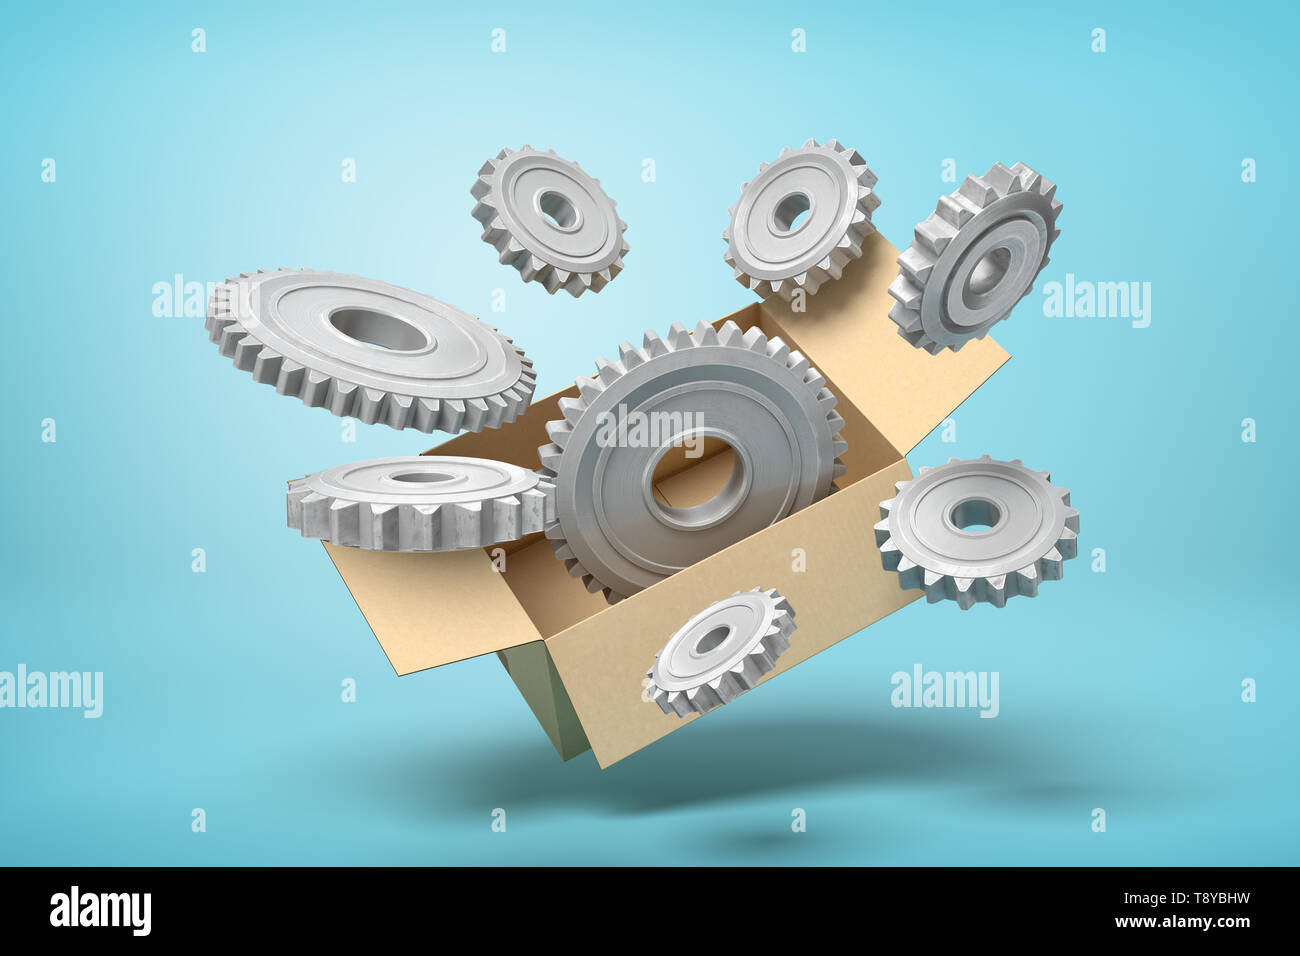 3d rendering of cardboard box in air full of grey metal cogwheels flying out from it on light-blue background. Stock Photo